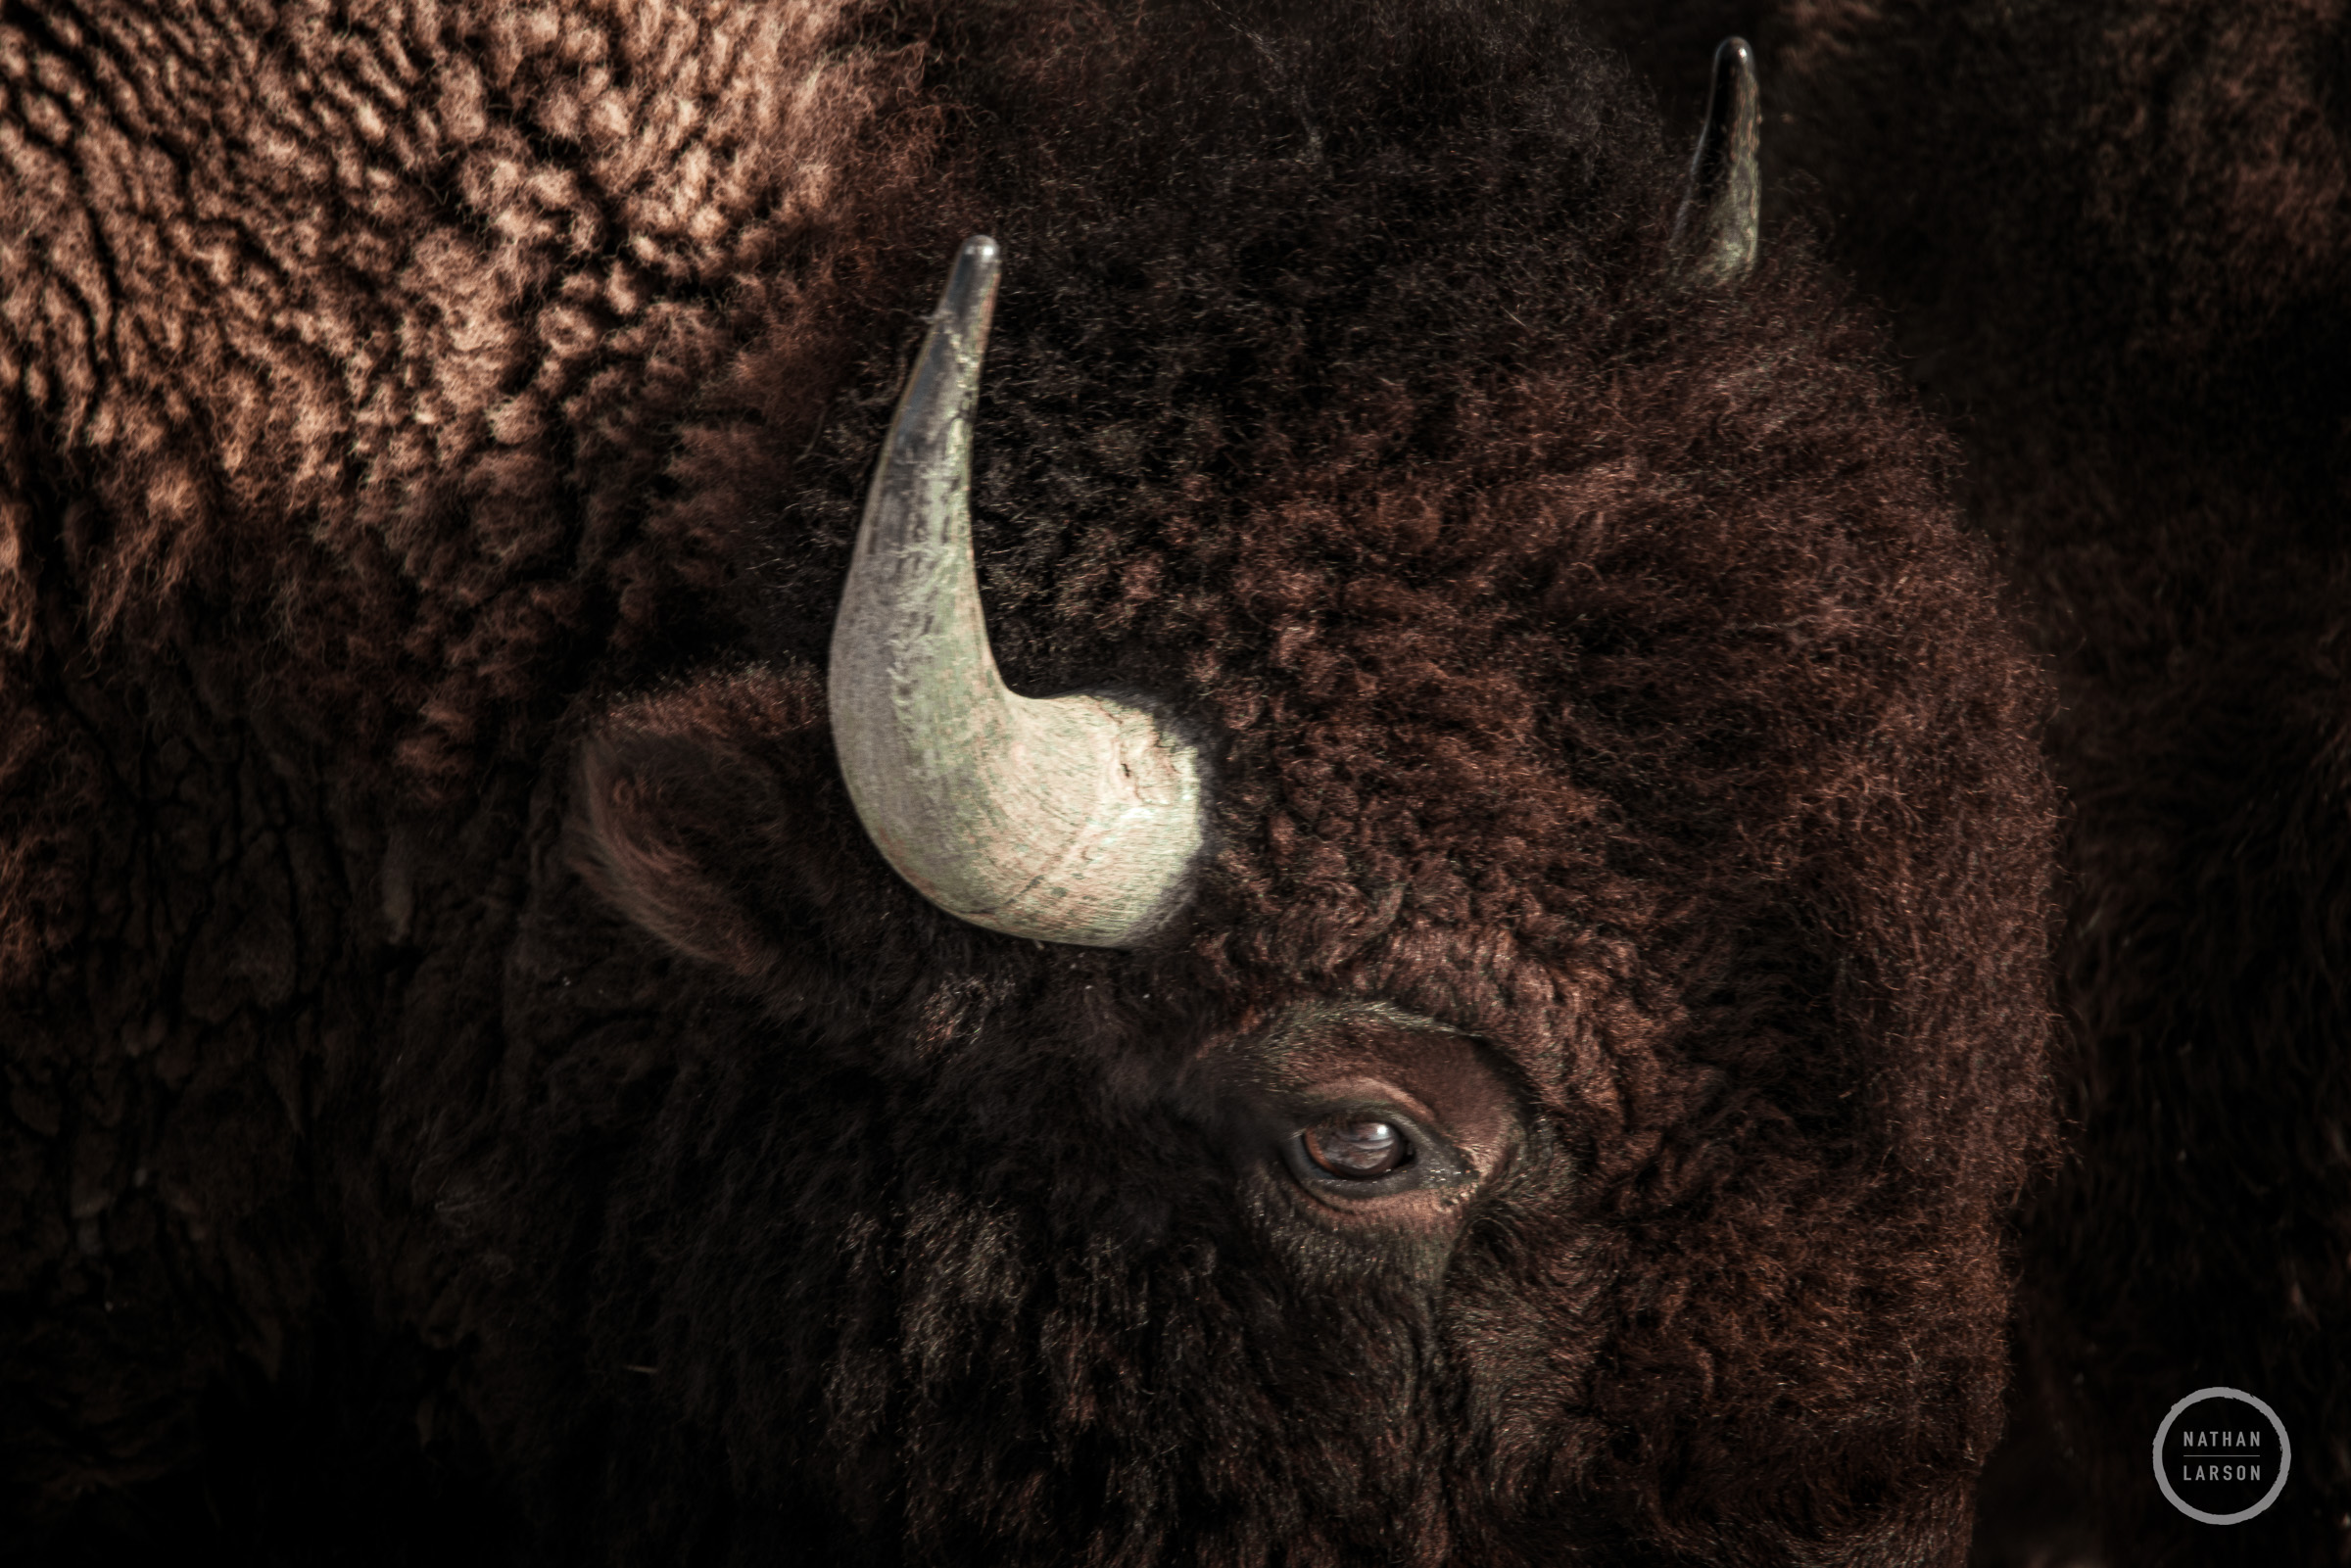 The weatherd horns of an American Bison with the afternoon sunset reflecting in its eyes.